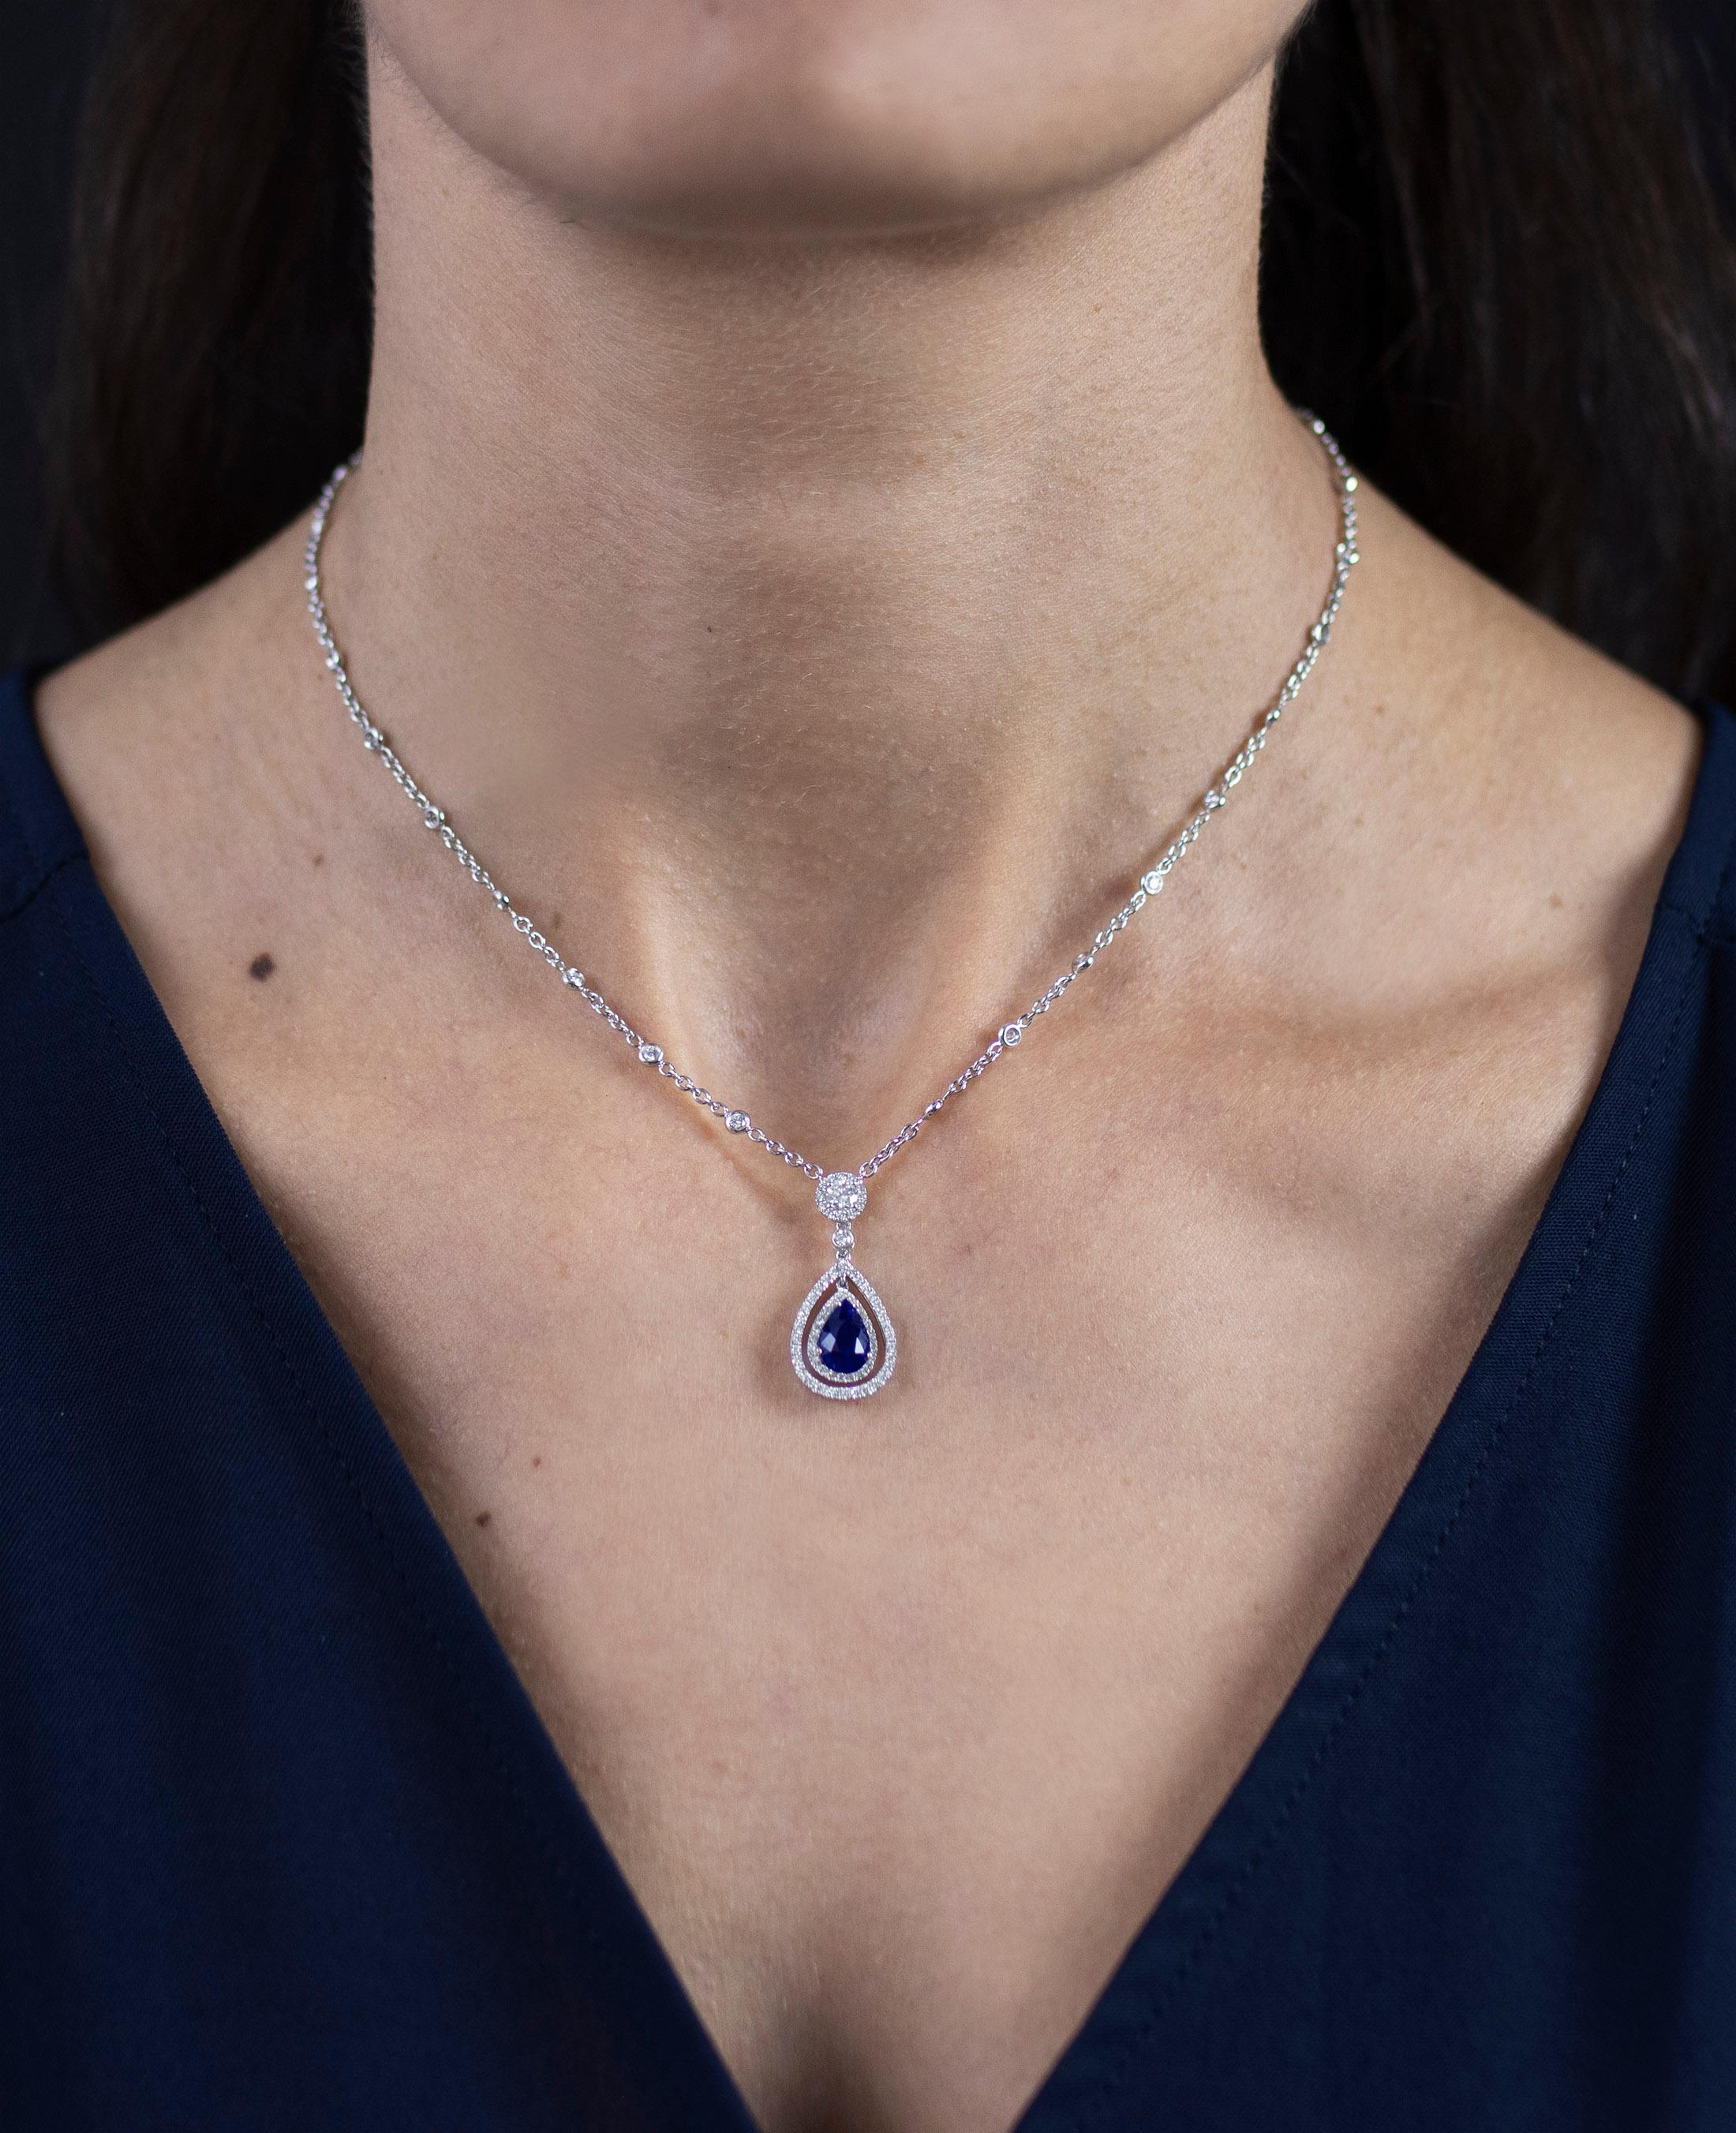 A classic pendant necklace showcasing a pear shape blue sapphire weighing 1.78 carats total. Embellished by two rows of round diamonds, weighing 1.28 carats total. Suspended on a round cut diamond halo surmount attached to a diamonds by the yard